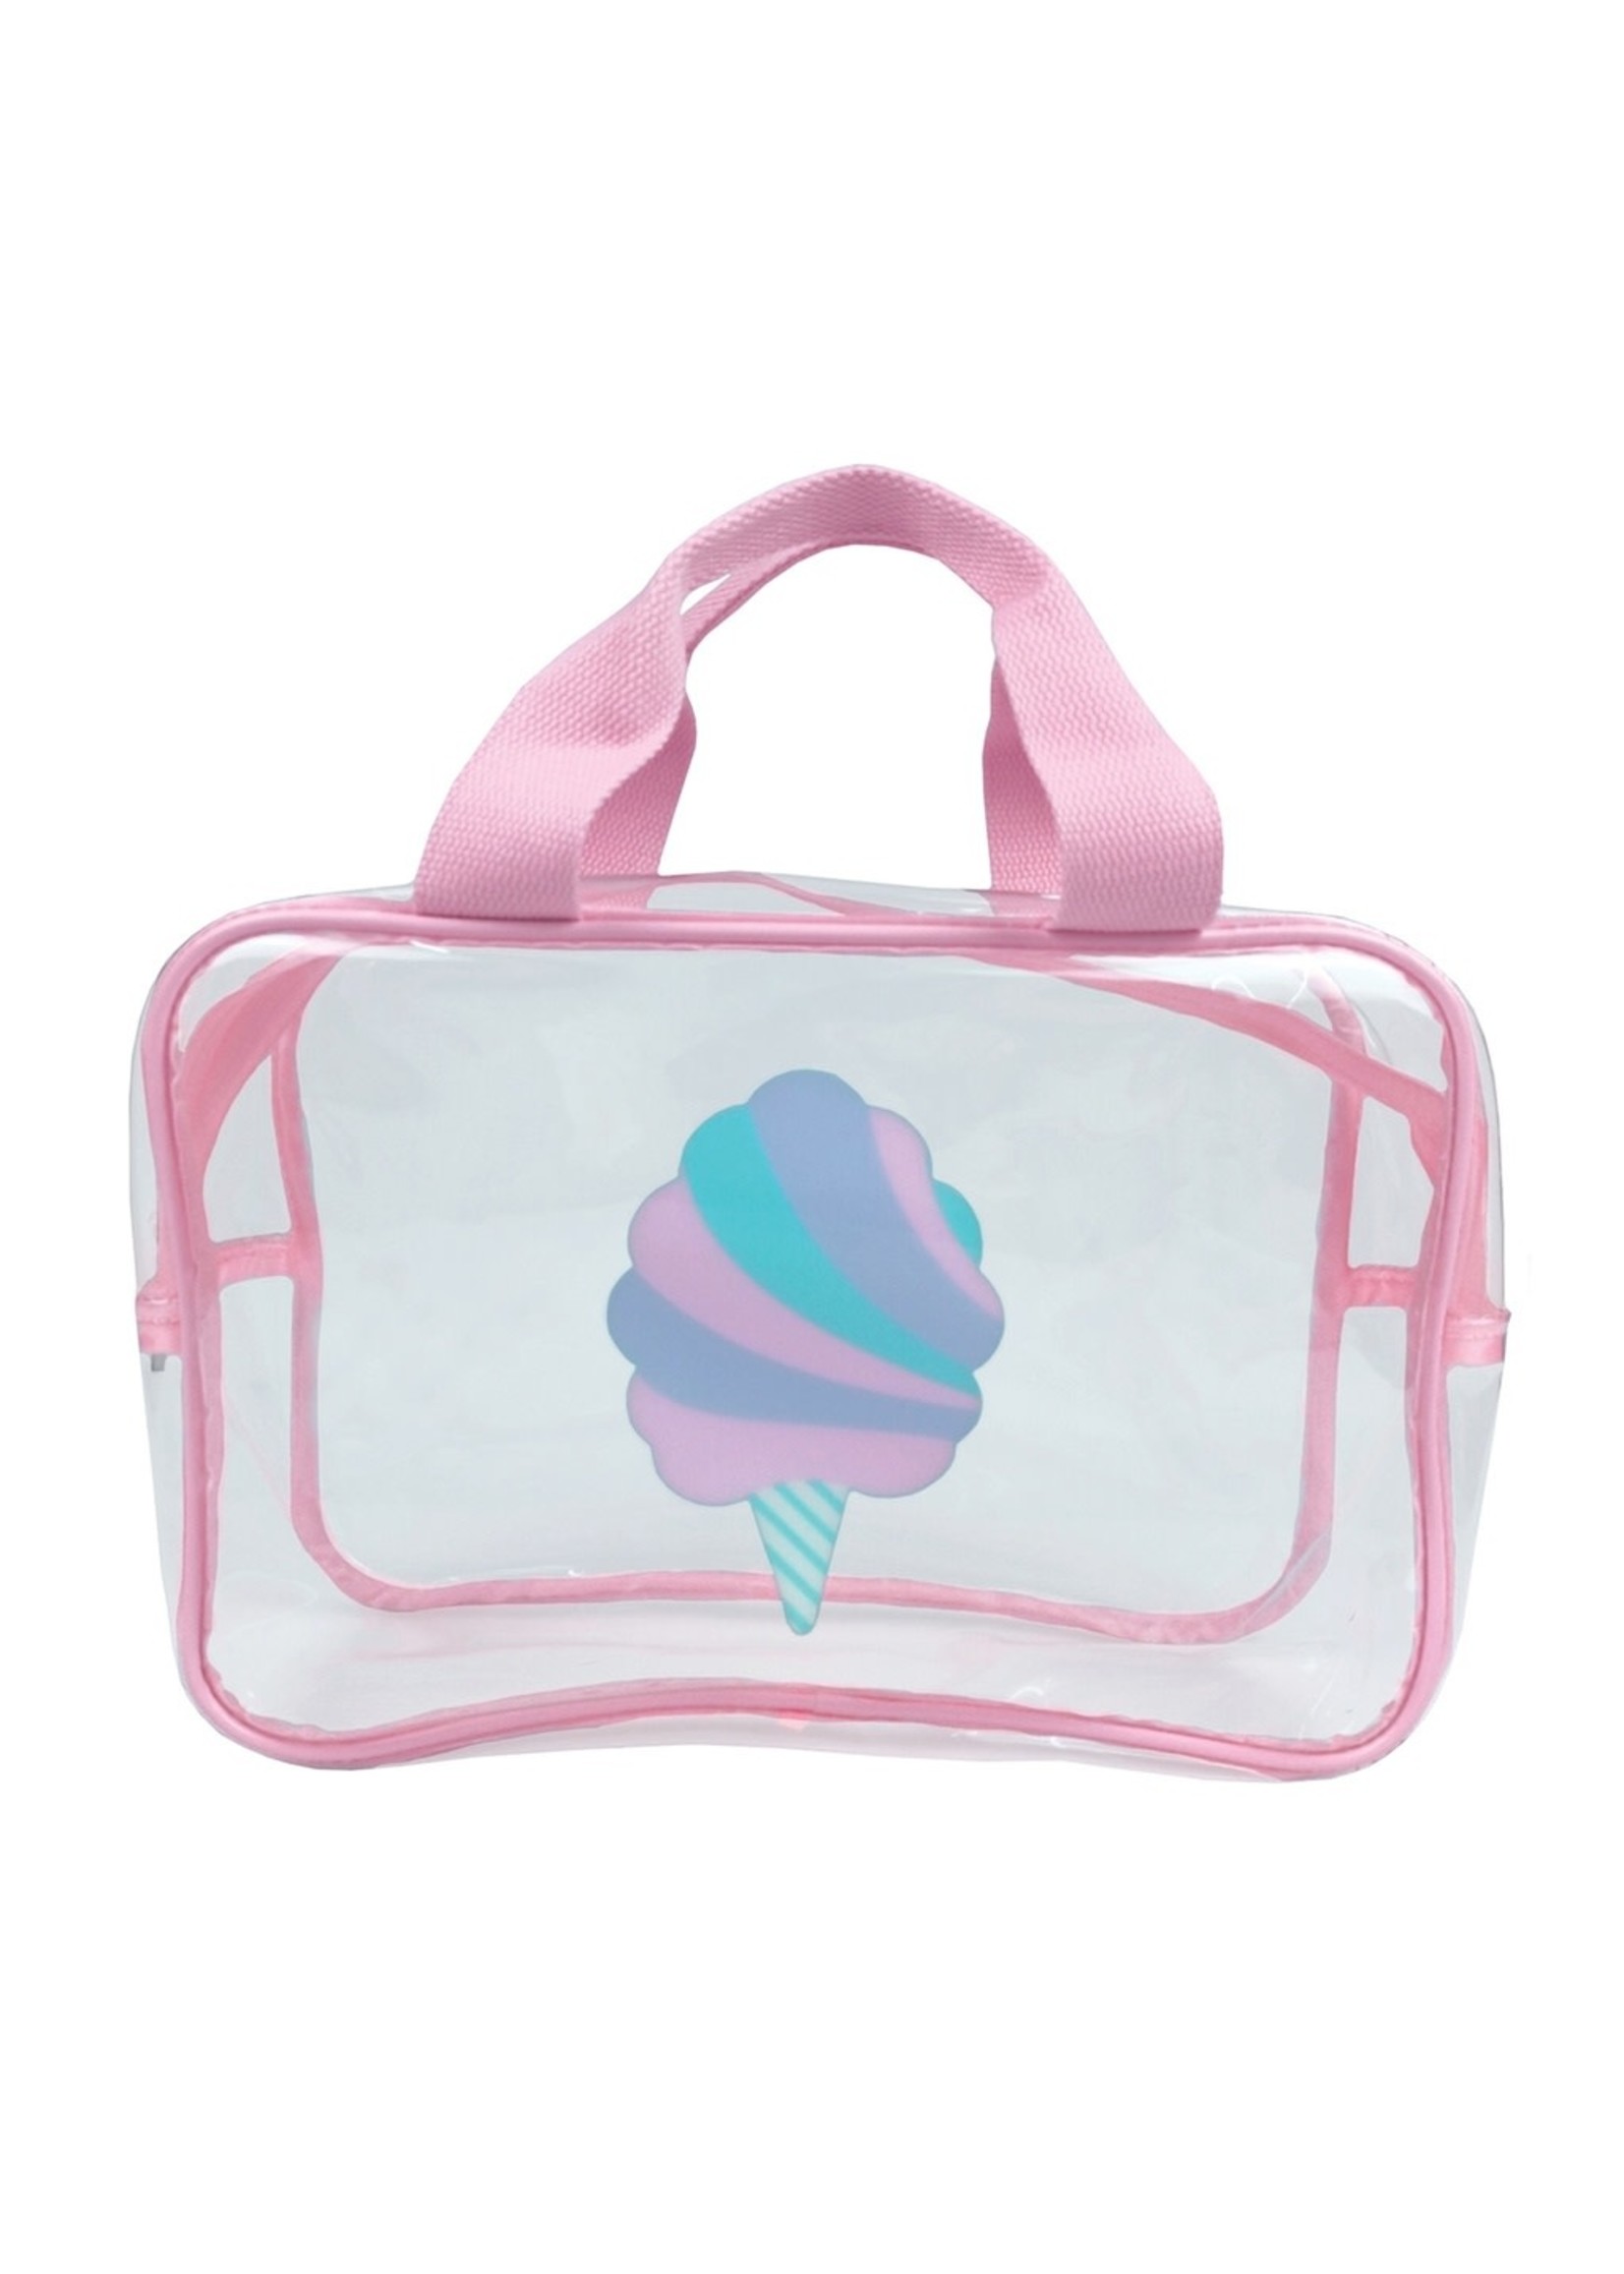 Iscream Cotton Candy Cosmetic Bags